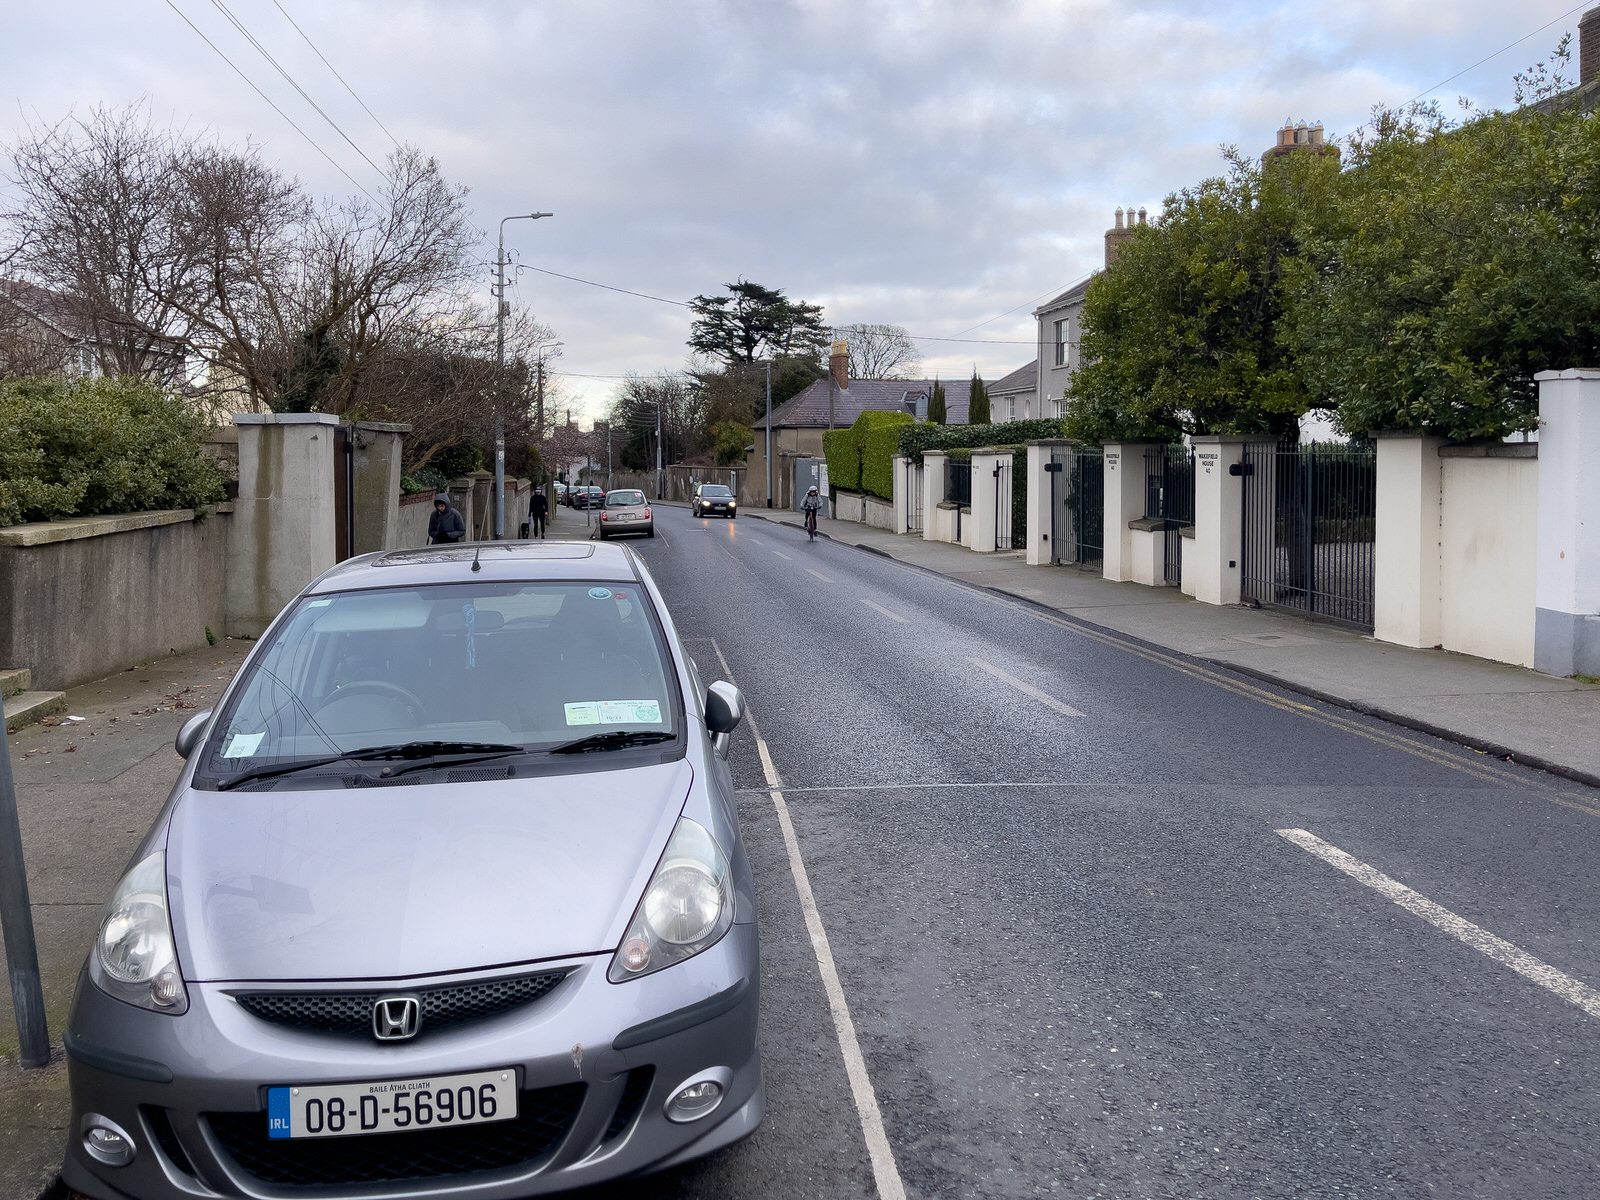 BOOTERSTOWN AVENUE 002